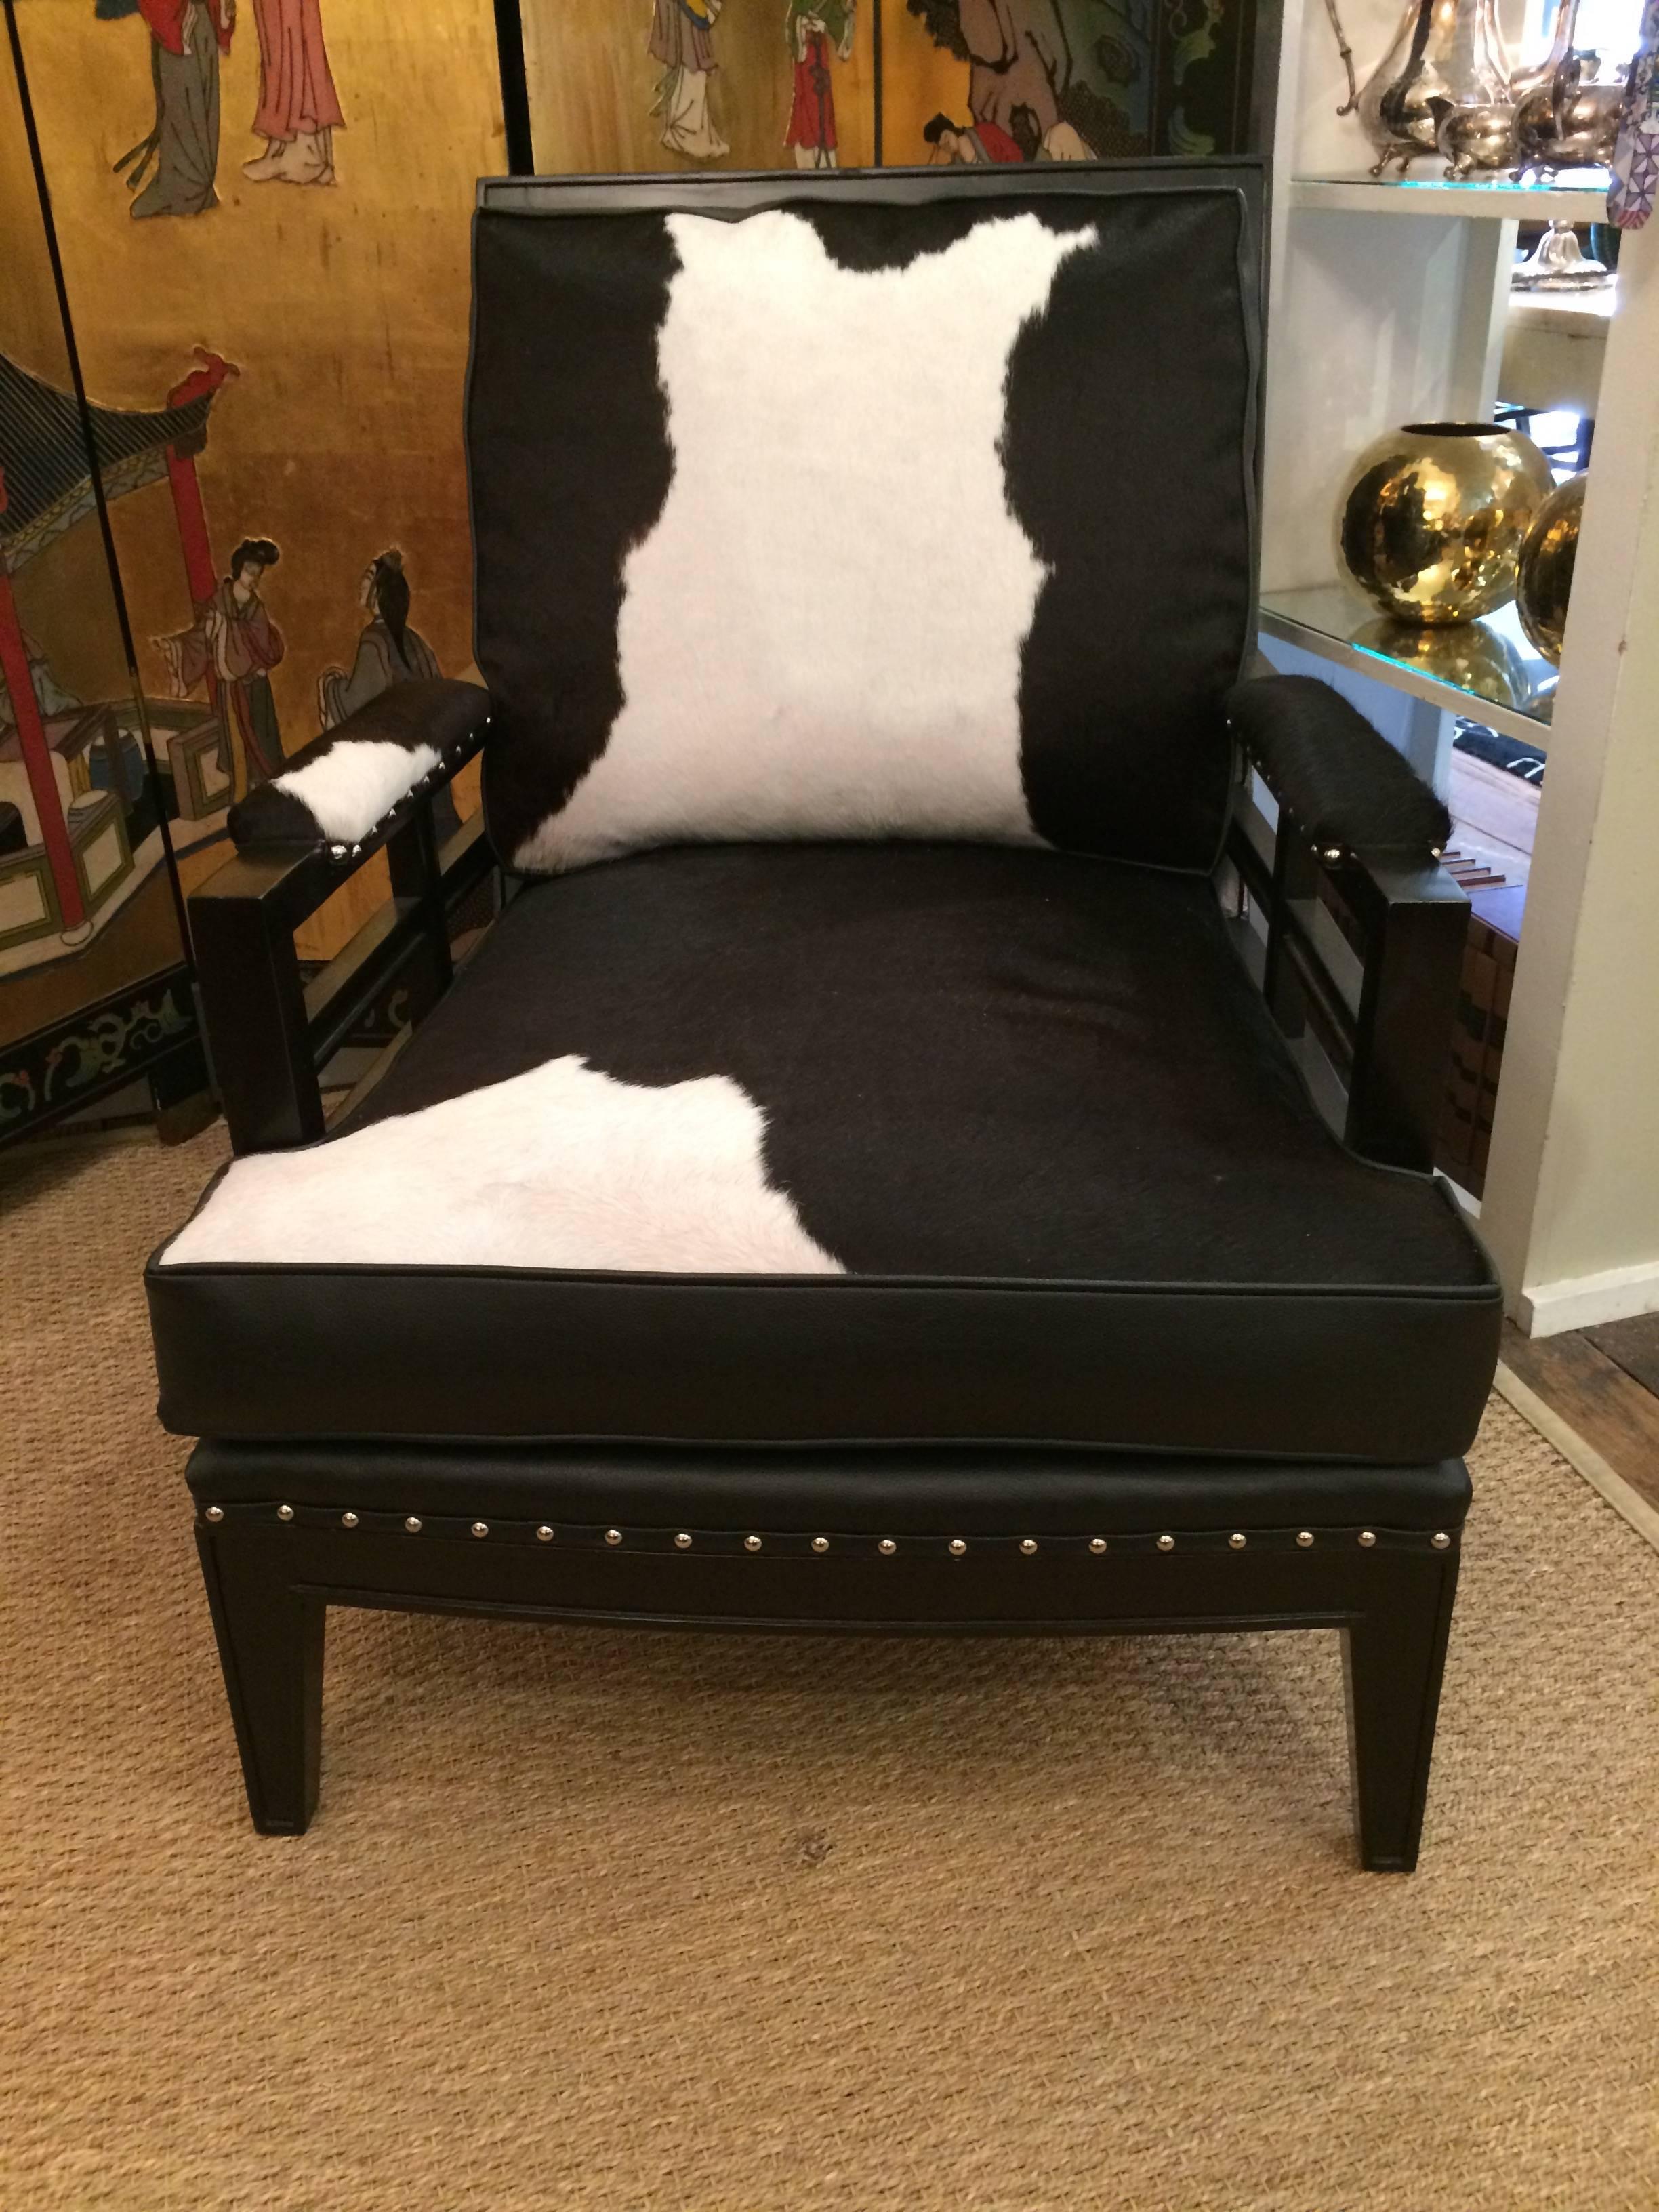 Fabulously chic custom club chair and ottoman having ebonized wood and a mix of black leather and black and white cowhide upholstery, finished with nailheads. The ottoman has a stretcher style base and measures 26 W x 19 D x 17 H.